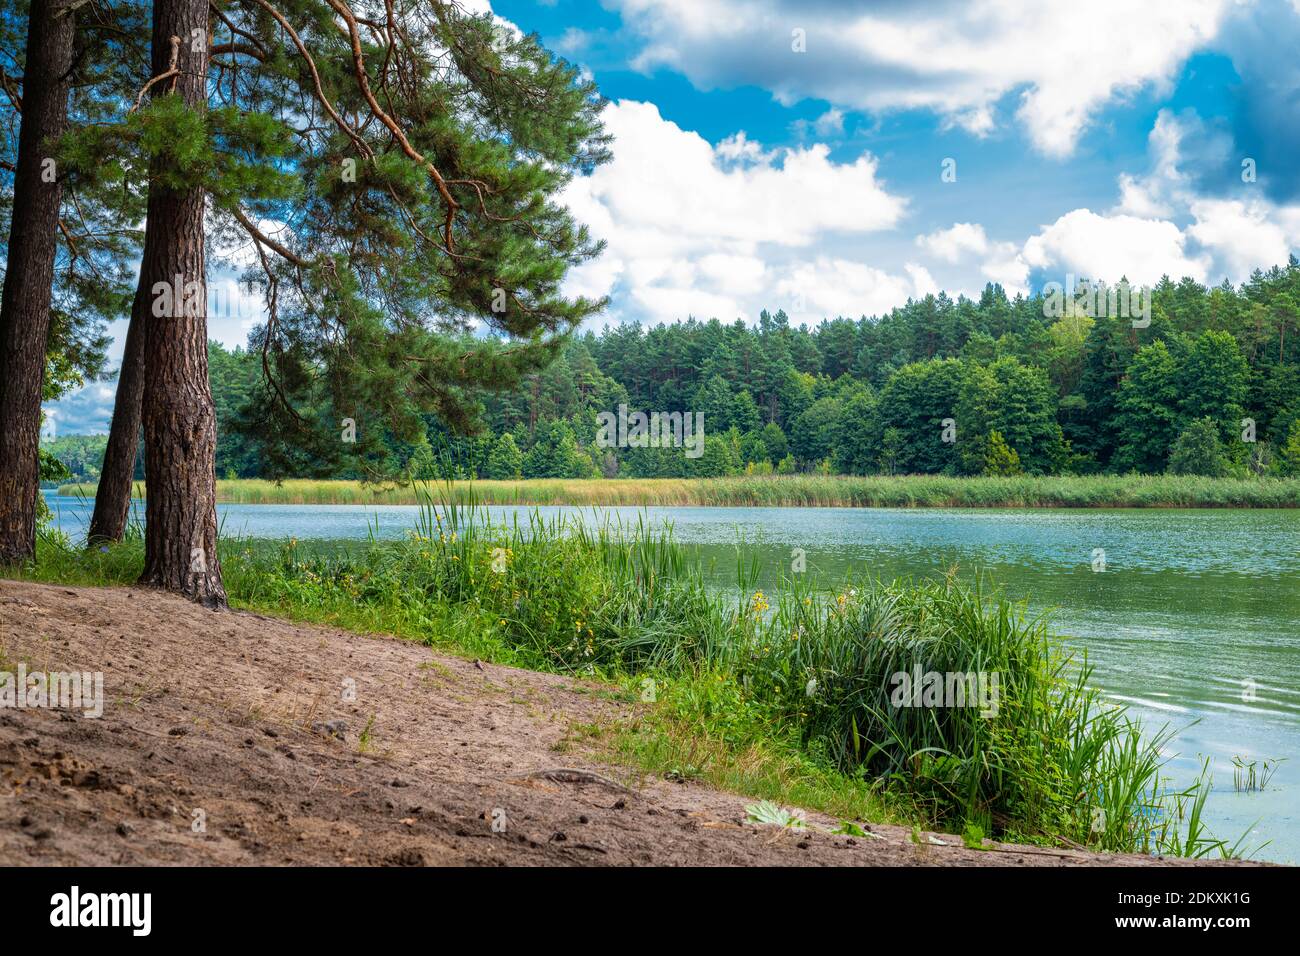 Beautiful natural scenery of river in forest. Landscape with coniferous woods and river. Wonderful scene of forest river in summer with pine trees. Br Stock Photo